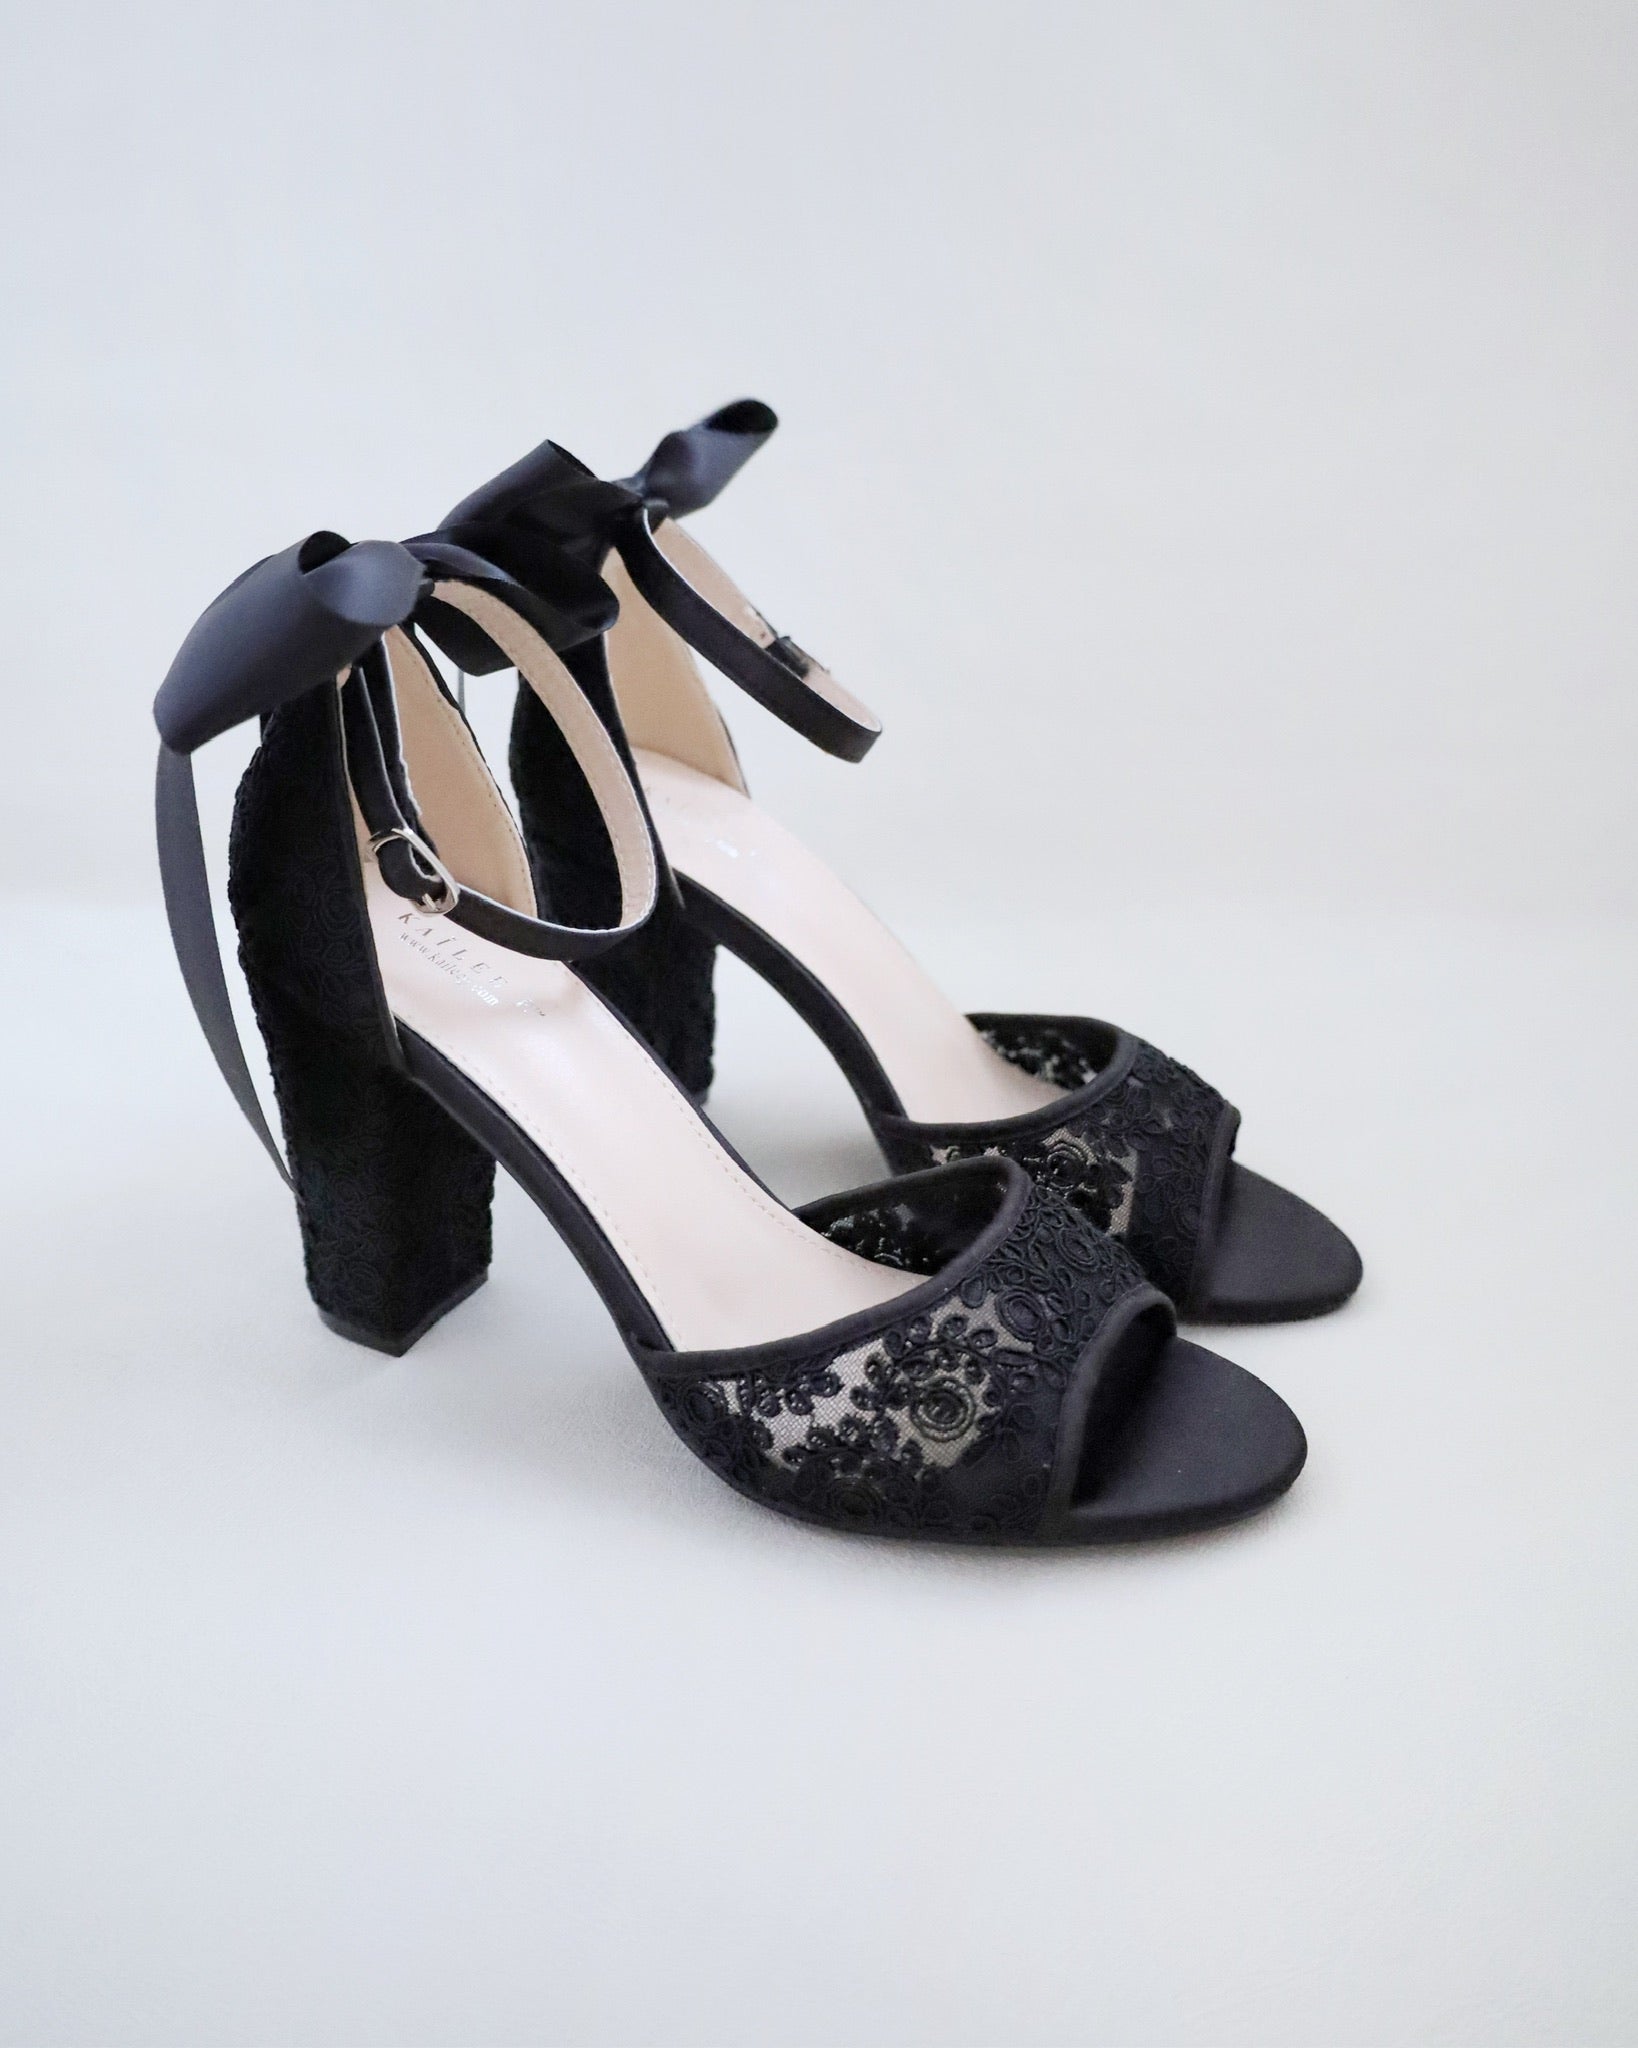 Black Crochet Lace Block Heel Evening Sandals with Satin Back Bow